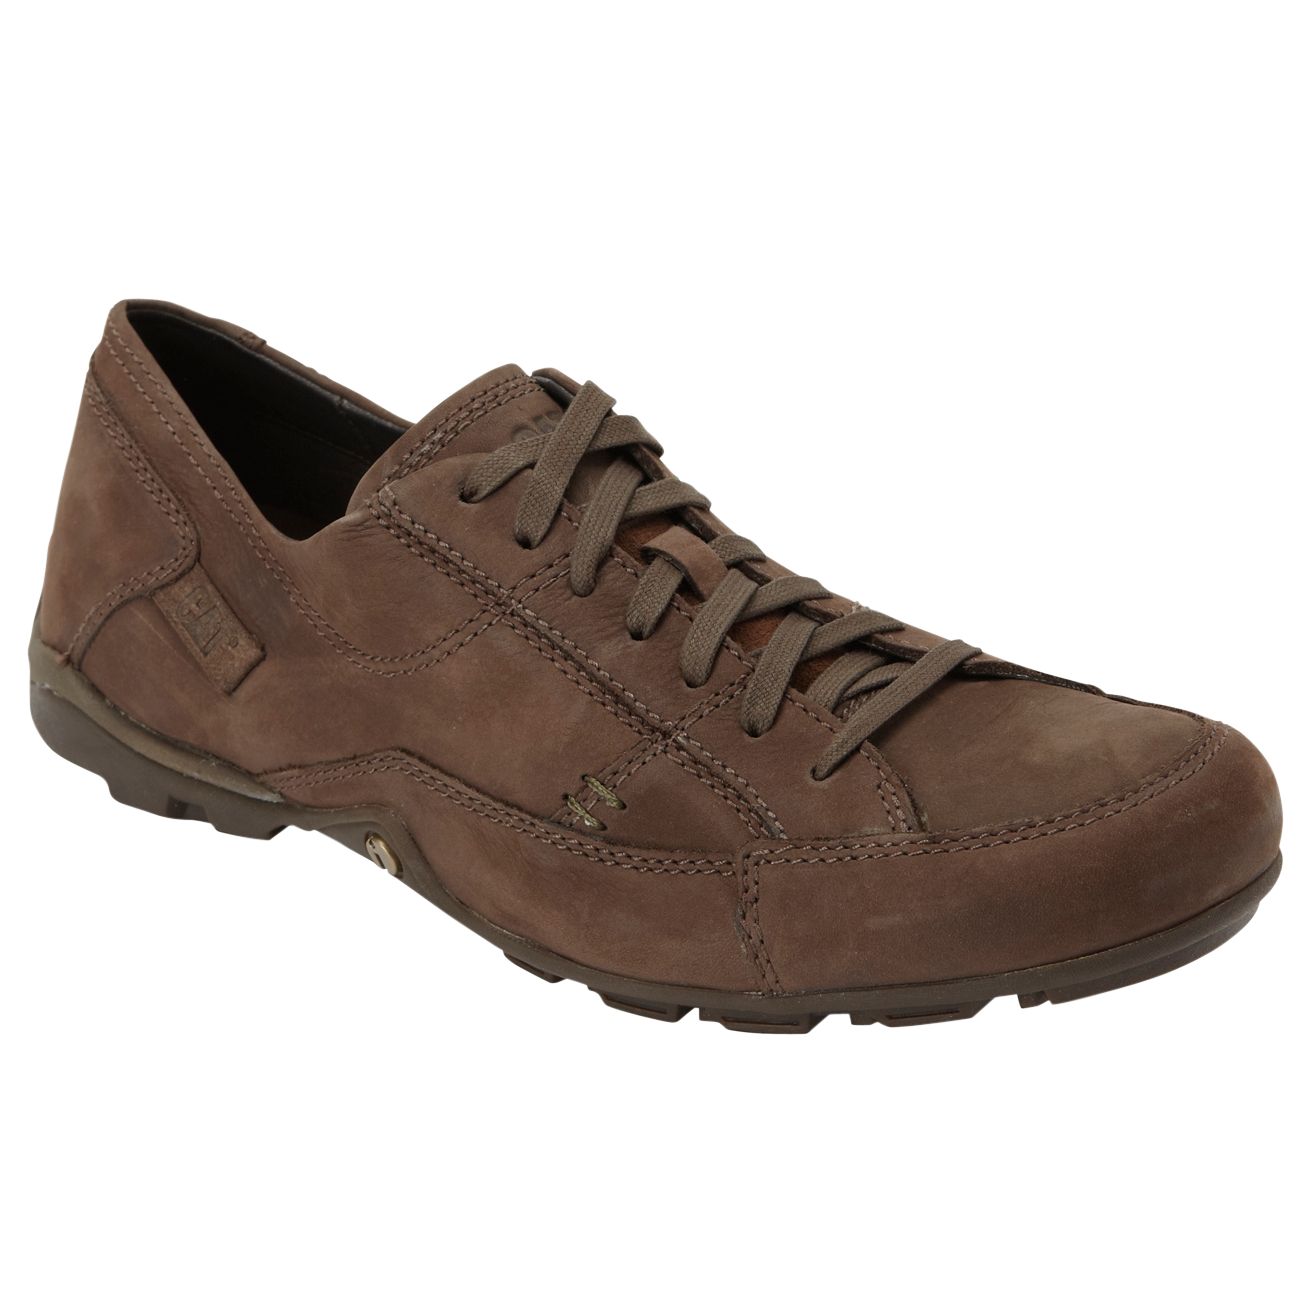 Caterpillar Vilano Leather Shoes Information. Best Price: £80.00. See More: